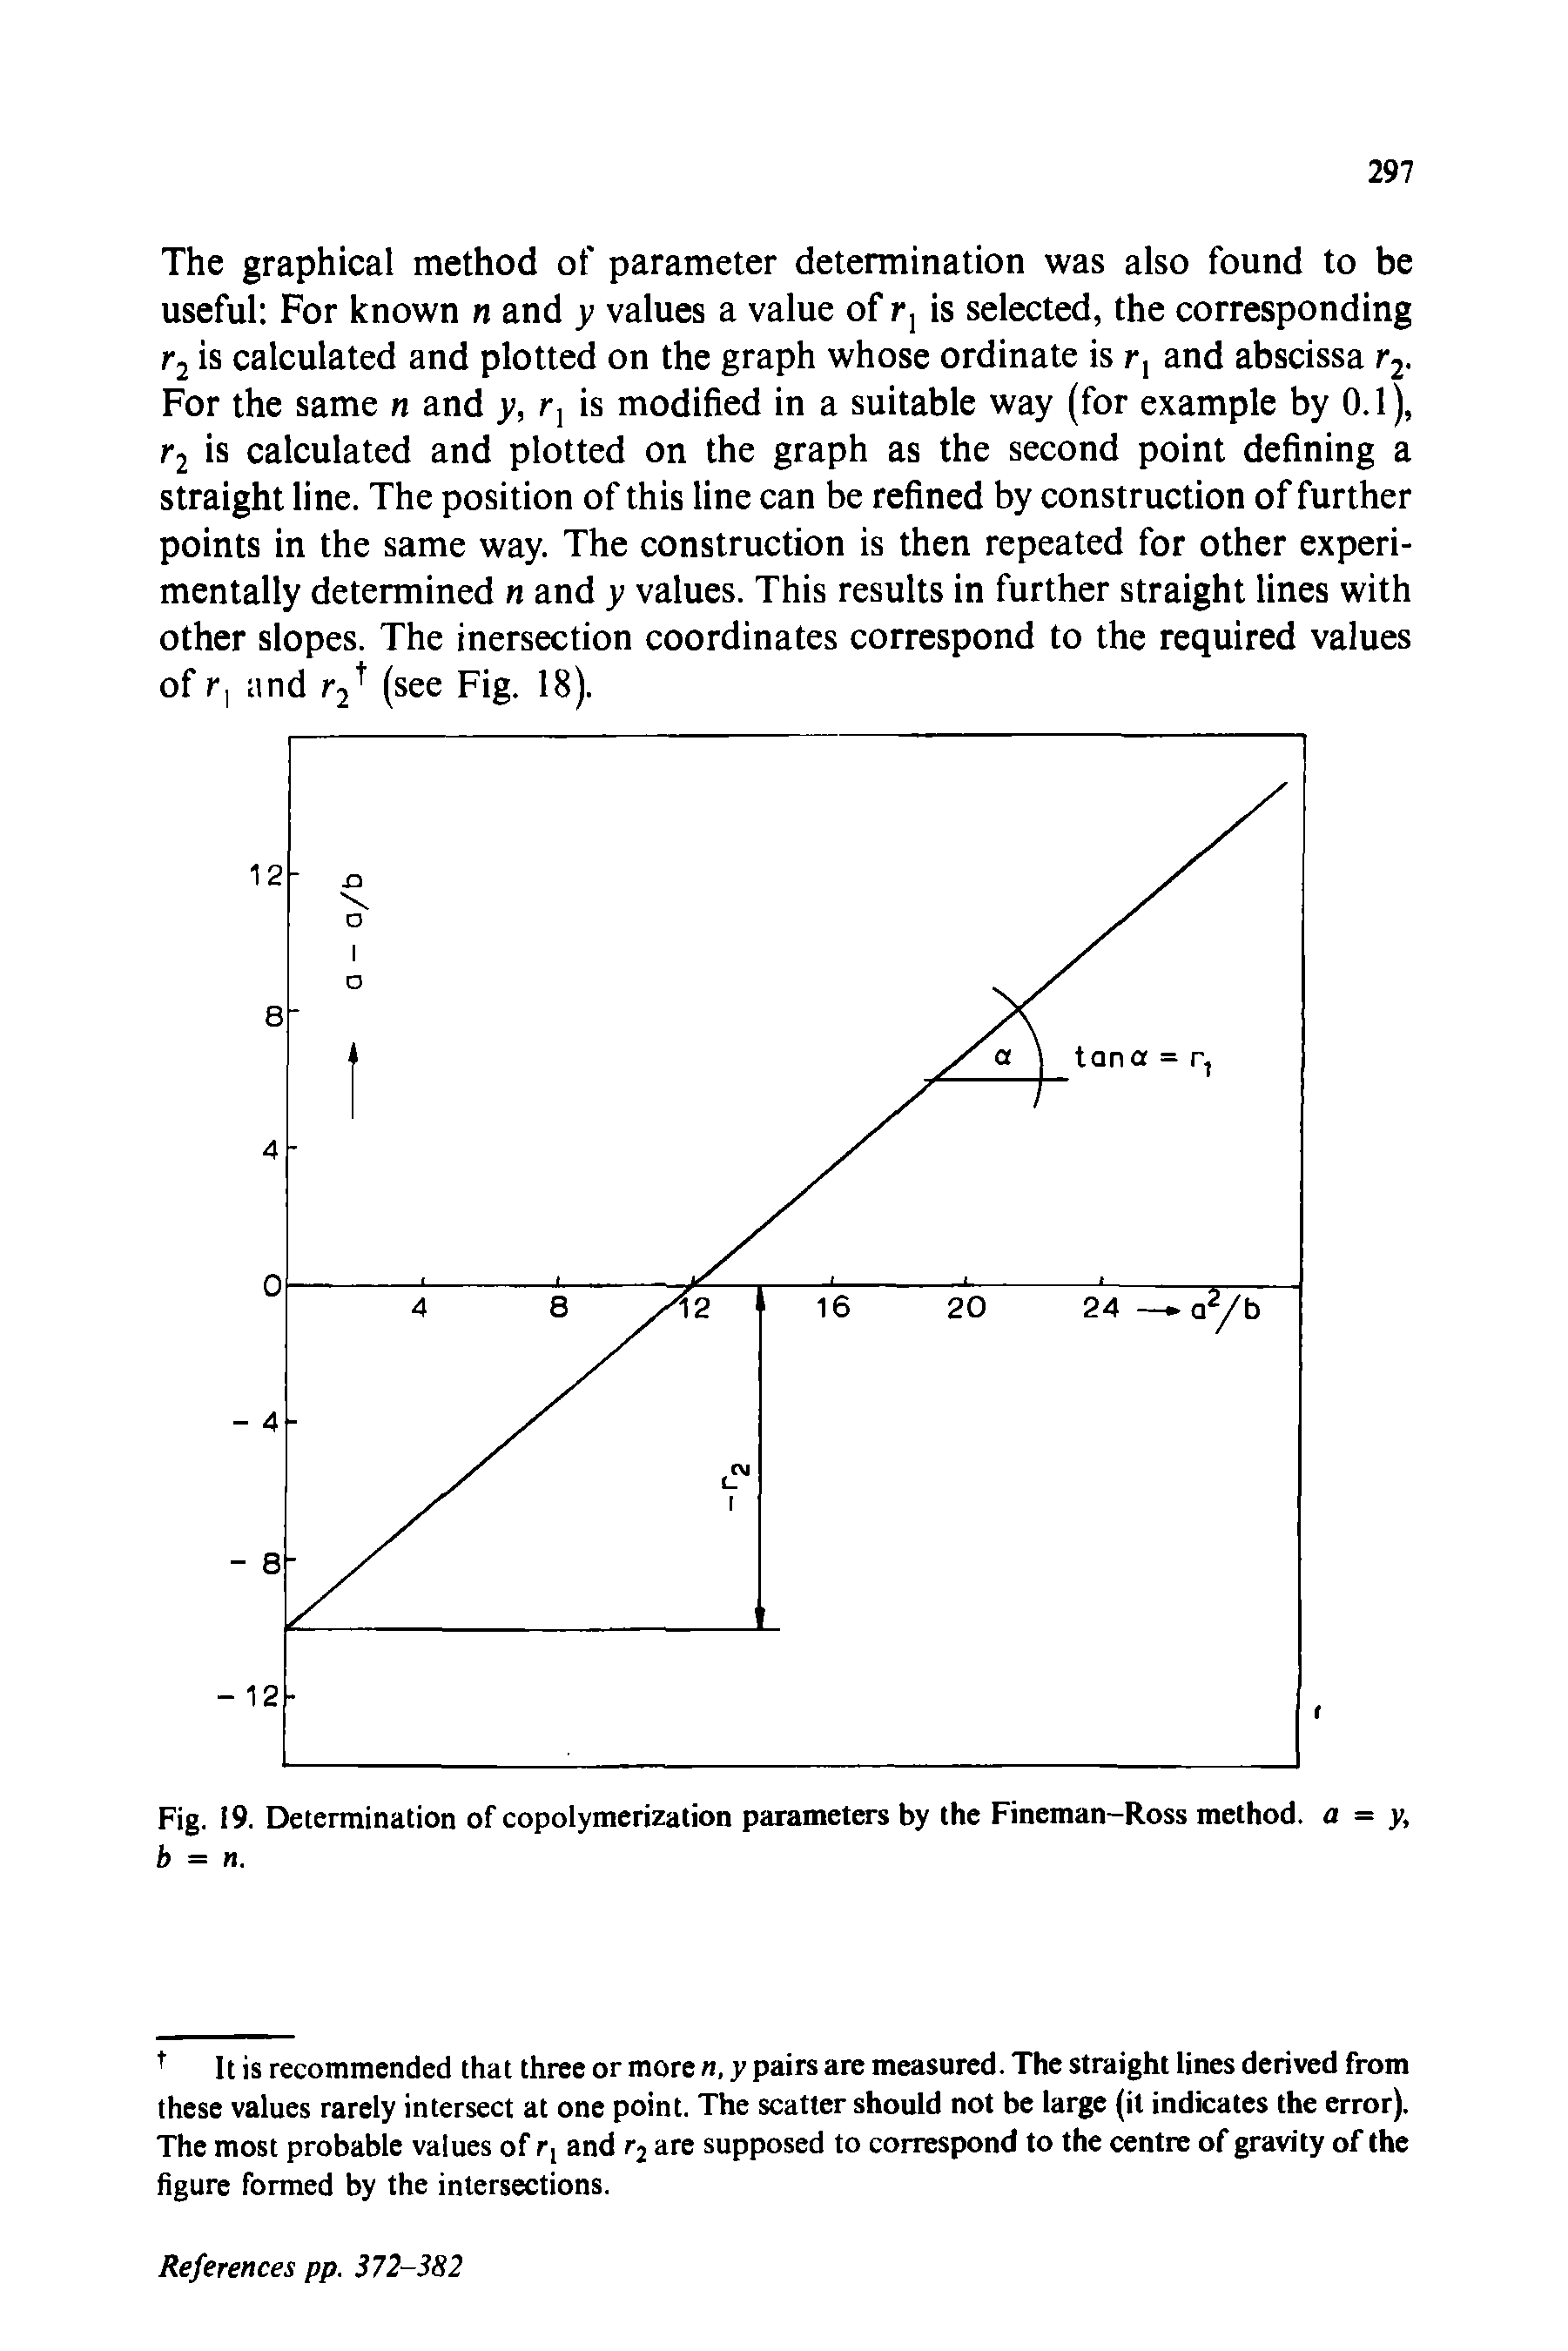 Fig. 19. Determination of copolymerization parameters by the Fineman-Ross method, a = y, b = n.